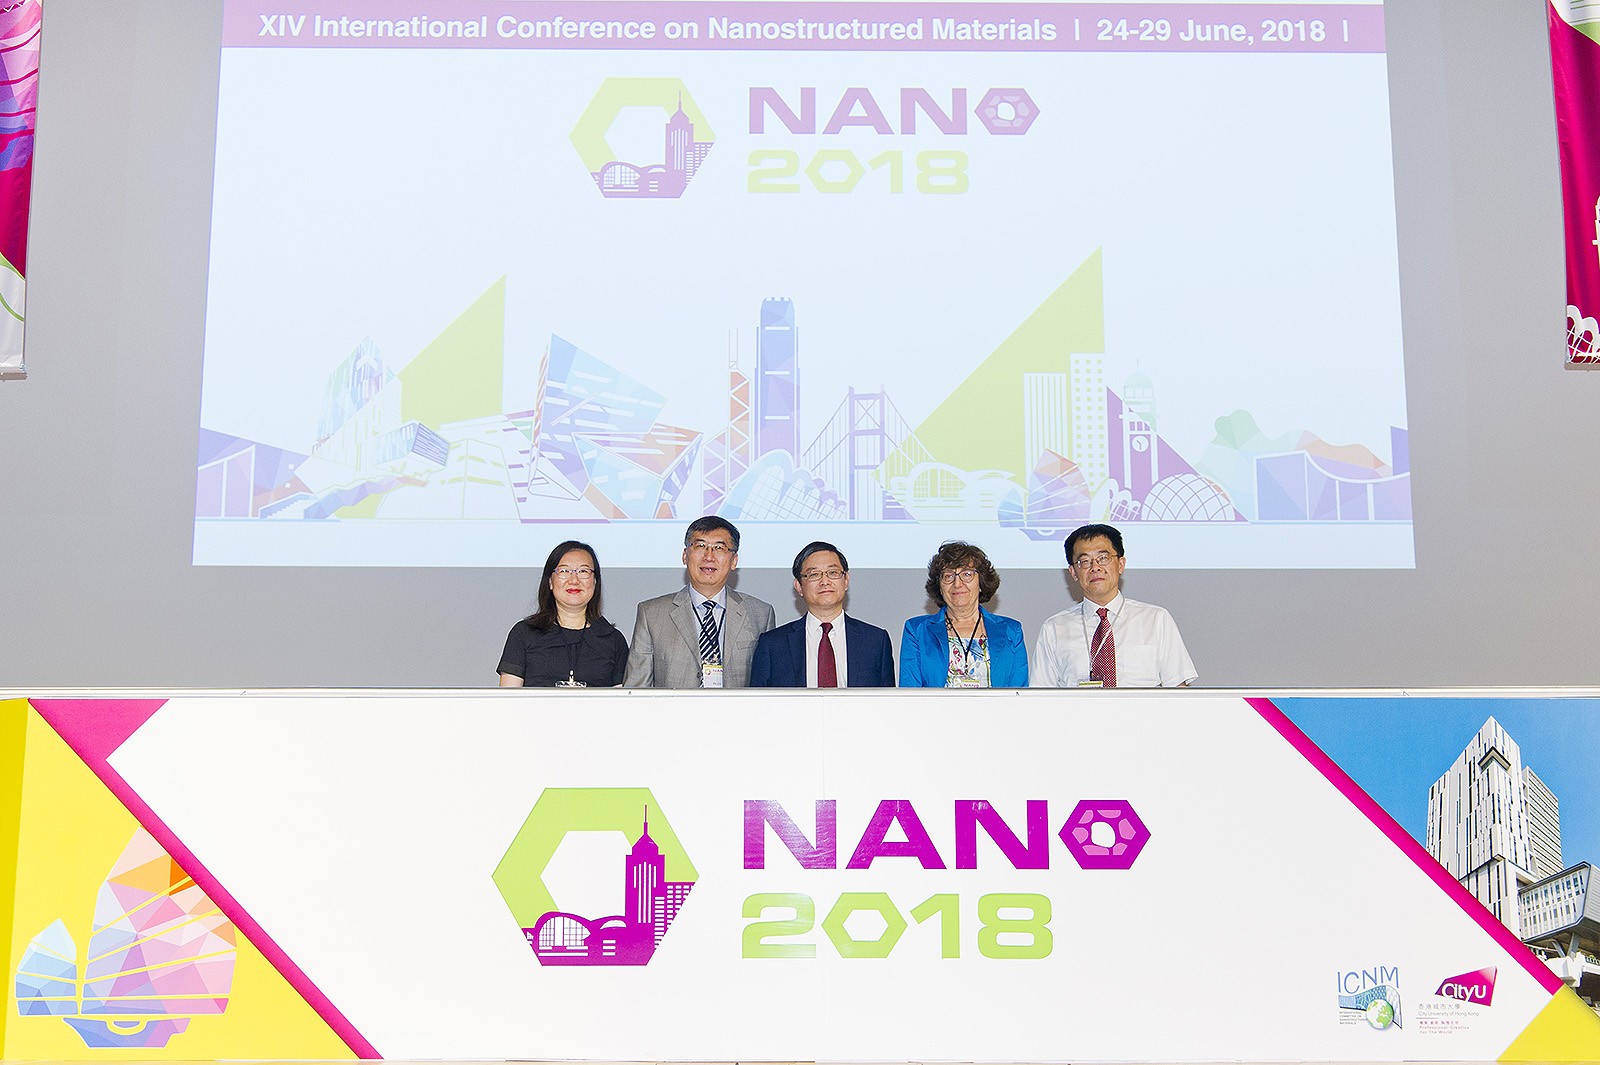 (From left) Professor Lu Kei and Professor Lu Ke, Co-chair of NANO 2018; Professor Lu Jian, Chair of NANO 2018; Dr Elisabetta Agostinelli, Chairman of International Committee on Nanostructured Materials; and Professor Nie Jianfeng, Chair of the next NANO, officiate the Conference.